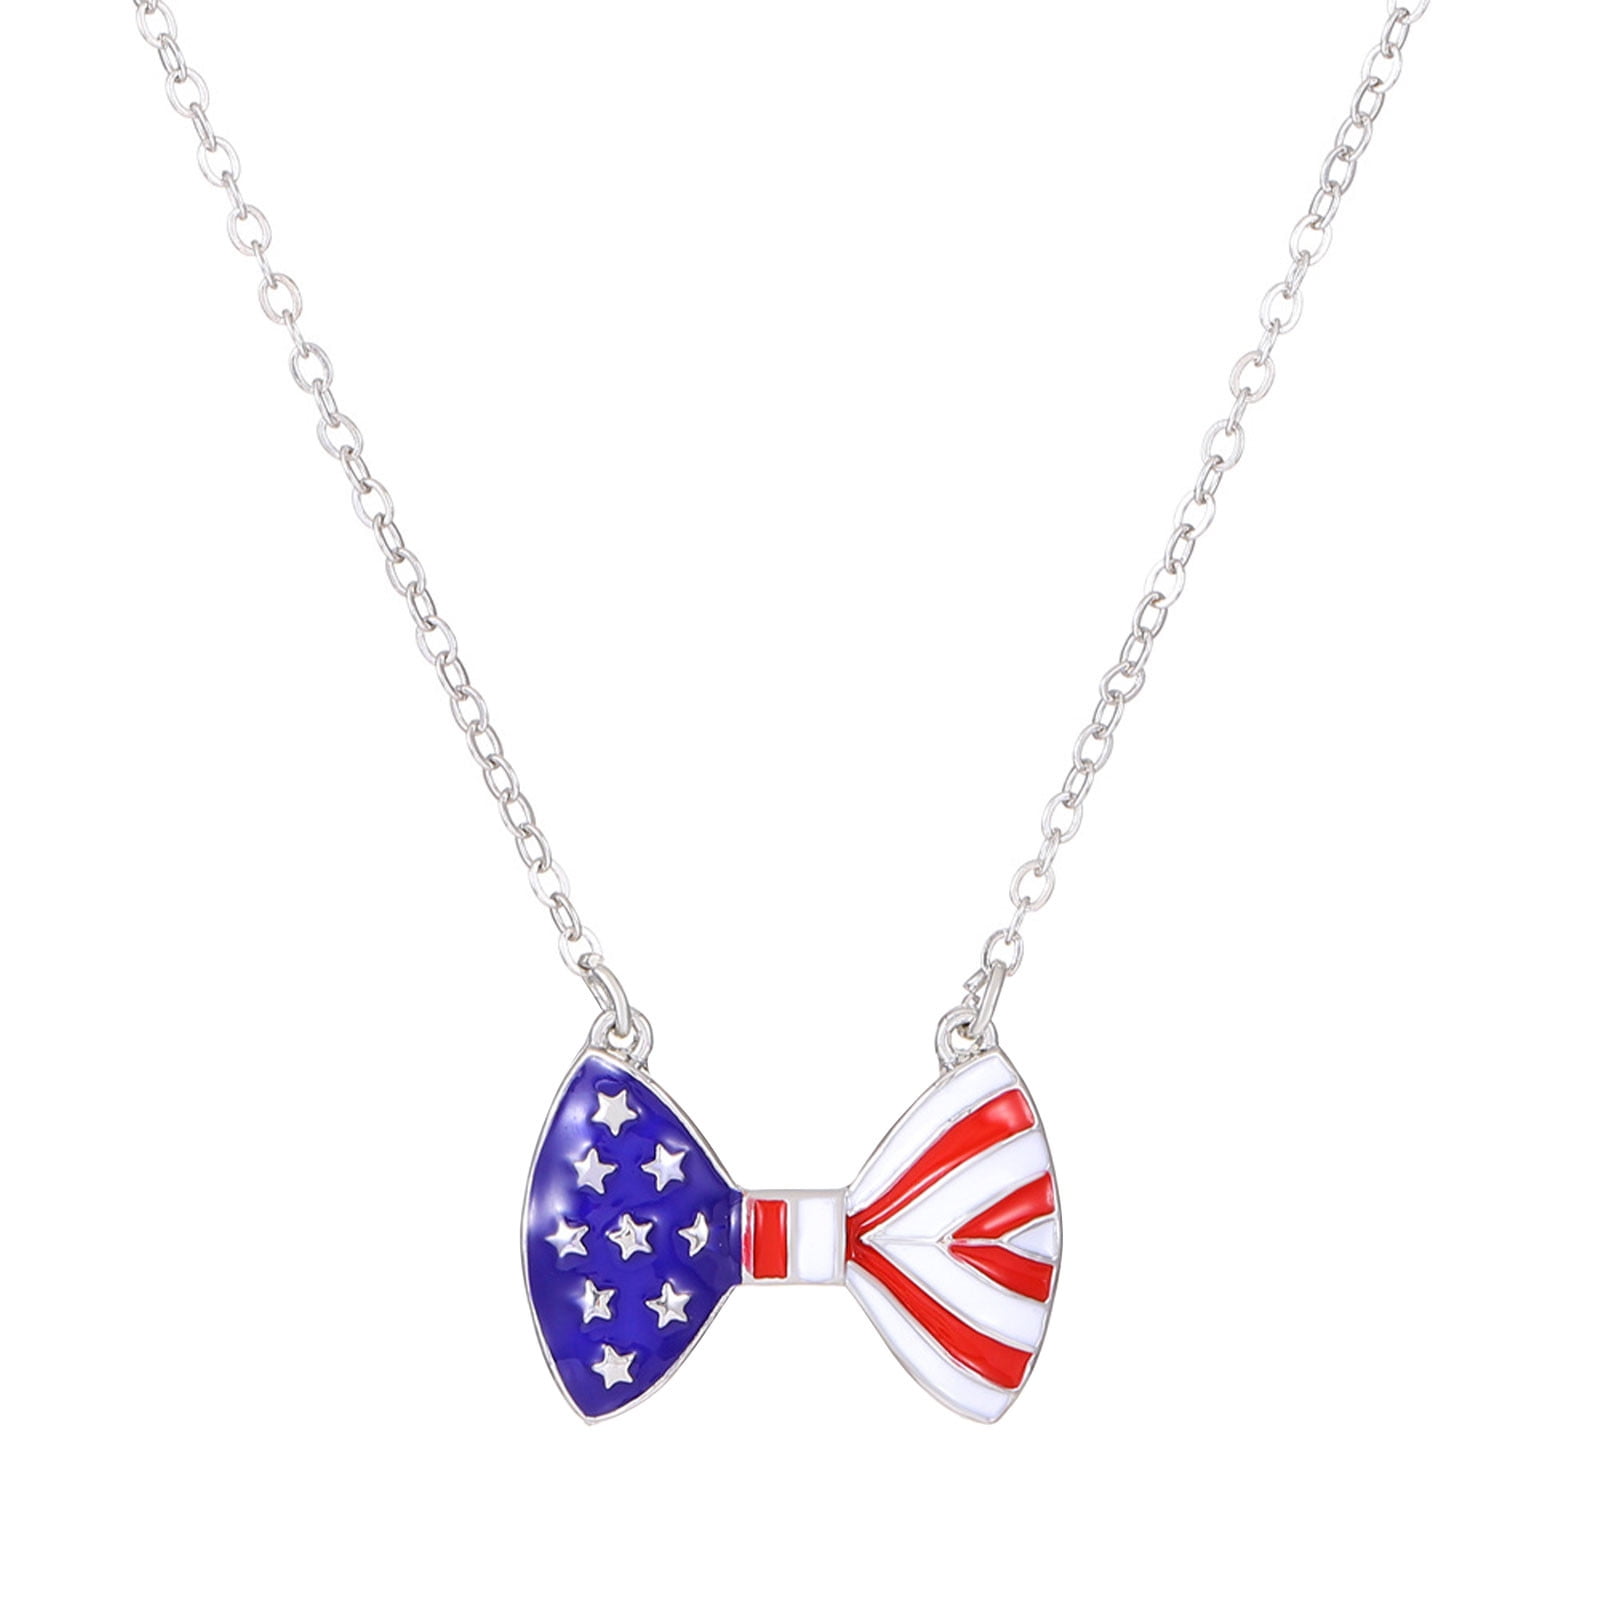 Midsumdr 4th of July Necklaces for Women Patriotic American Flag Heart Shape Necklace Red White and Blue Necklace Memorial Day Gift Jewelry Accessory b8683409 c333 4282 abfe 0da9cbe8cf07.31d9c8666d660849ed87e1c16c694d74